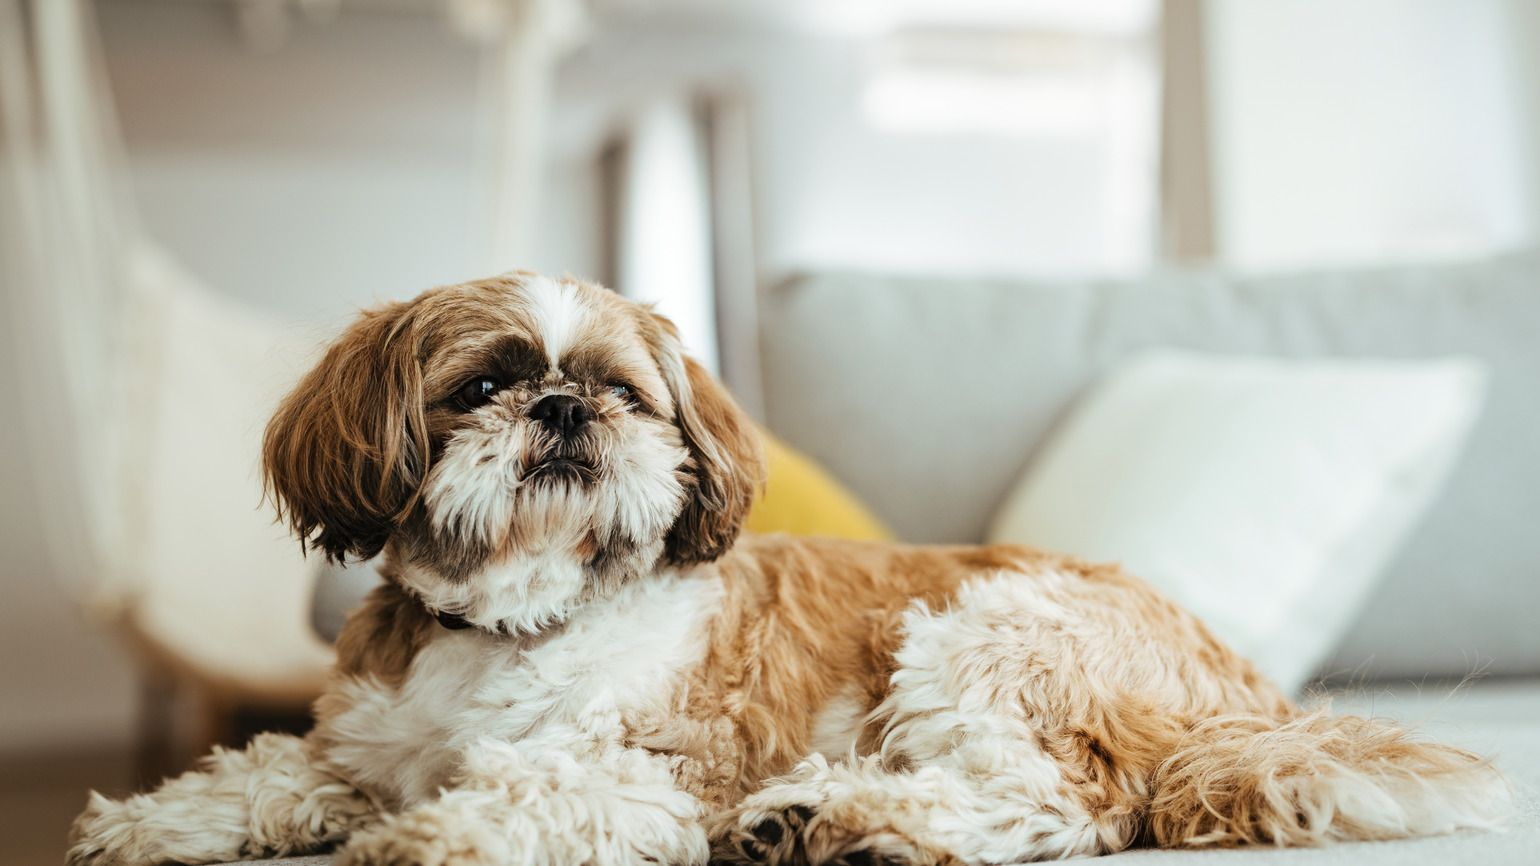 Shih tzu dog relaxing on the sofa (Getty Images)